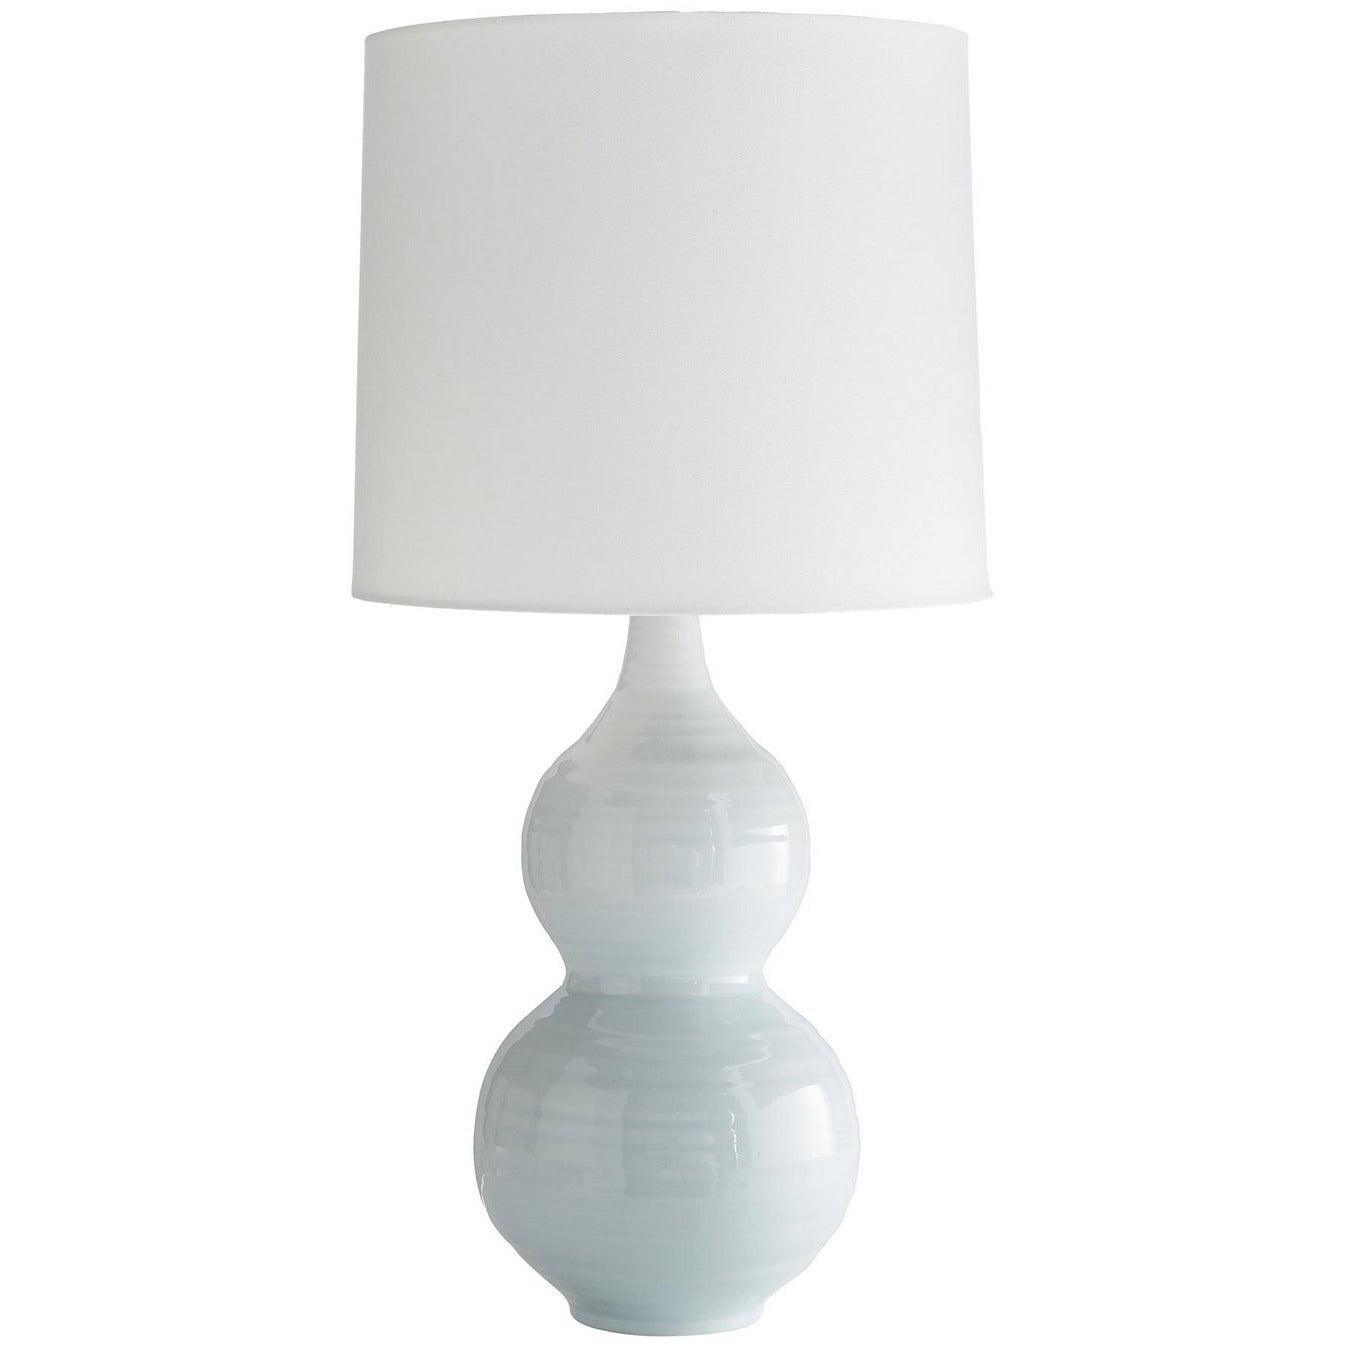 Arteriors - Lacey Table Lamp - 17352-151 | Montreal Lighting & Hardware